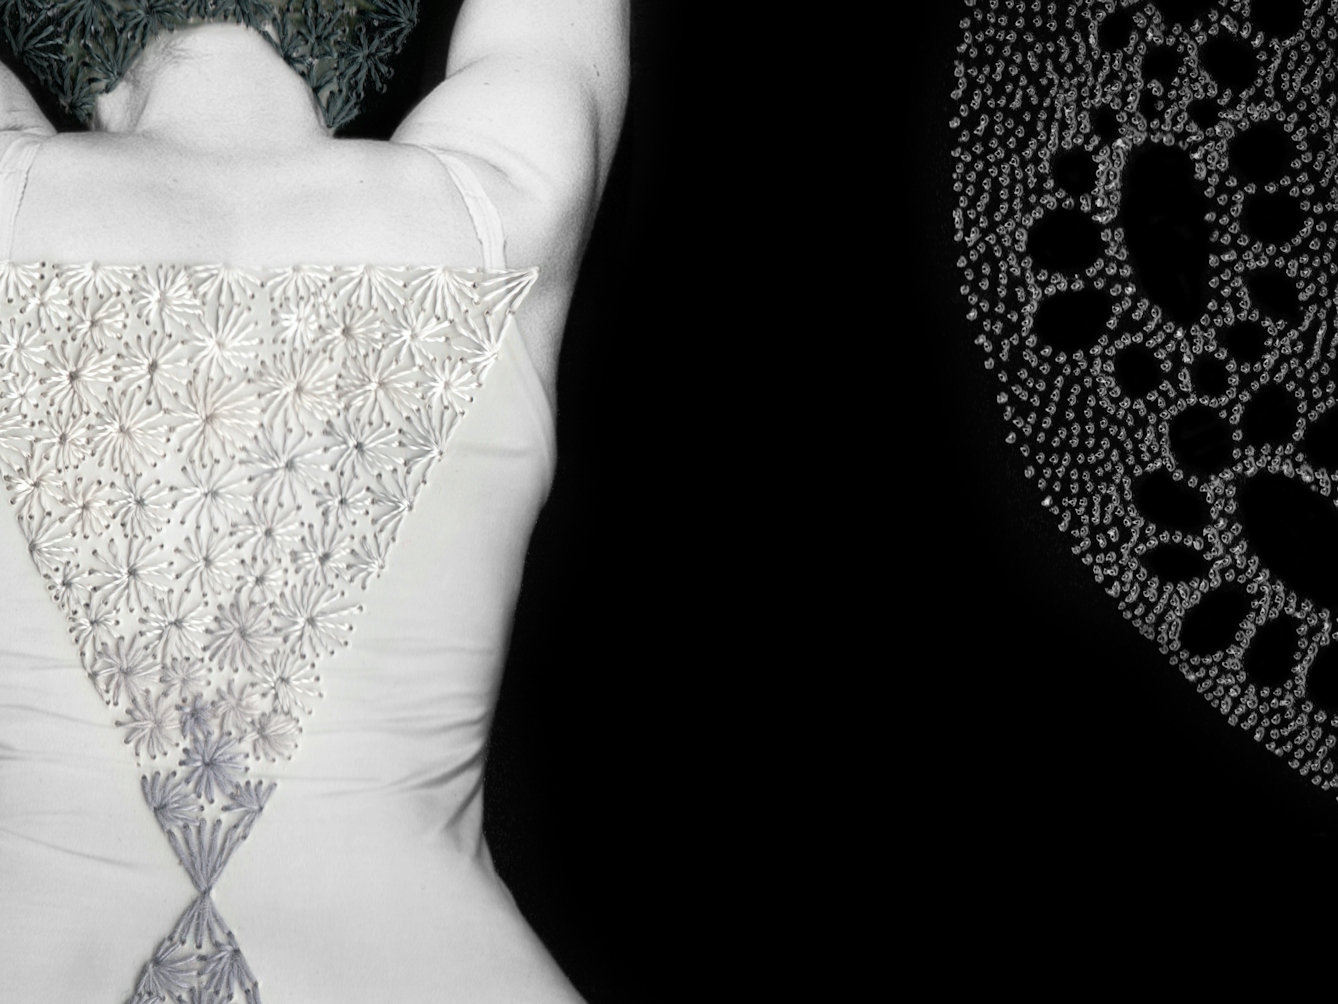 Artwork made up of a black and white photograph of a female figure from behind, from the waist up, against a black background.  Embroidered into the photographic print with grey thread is a crisscross floral pattern which exactly covers her head and hair. Across her back, embroidered in silver thread is a large triangle connected to a smaller triangle. To the right of the figure is a large curved form made up of a layered texture of dots.